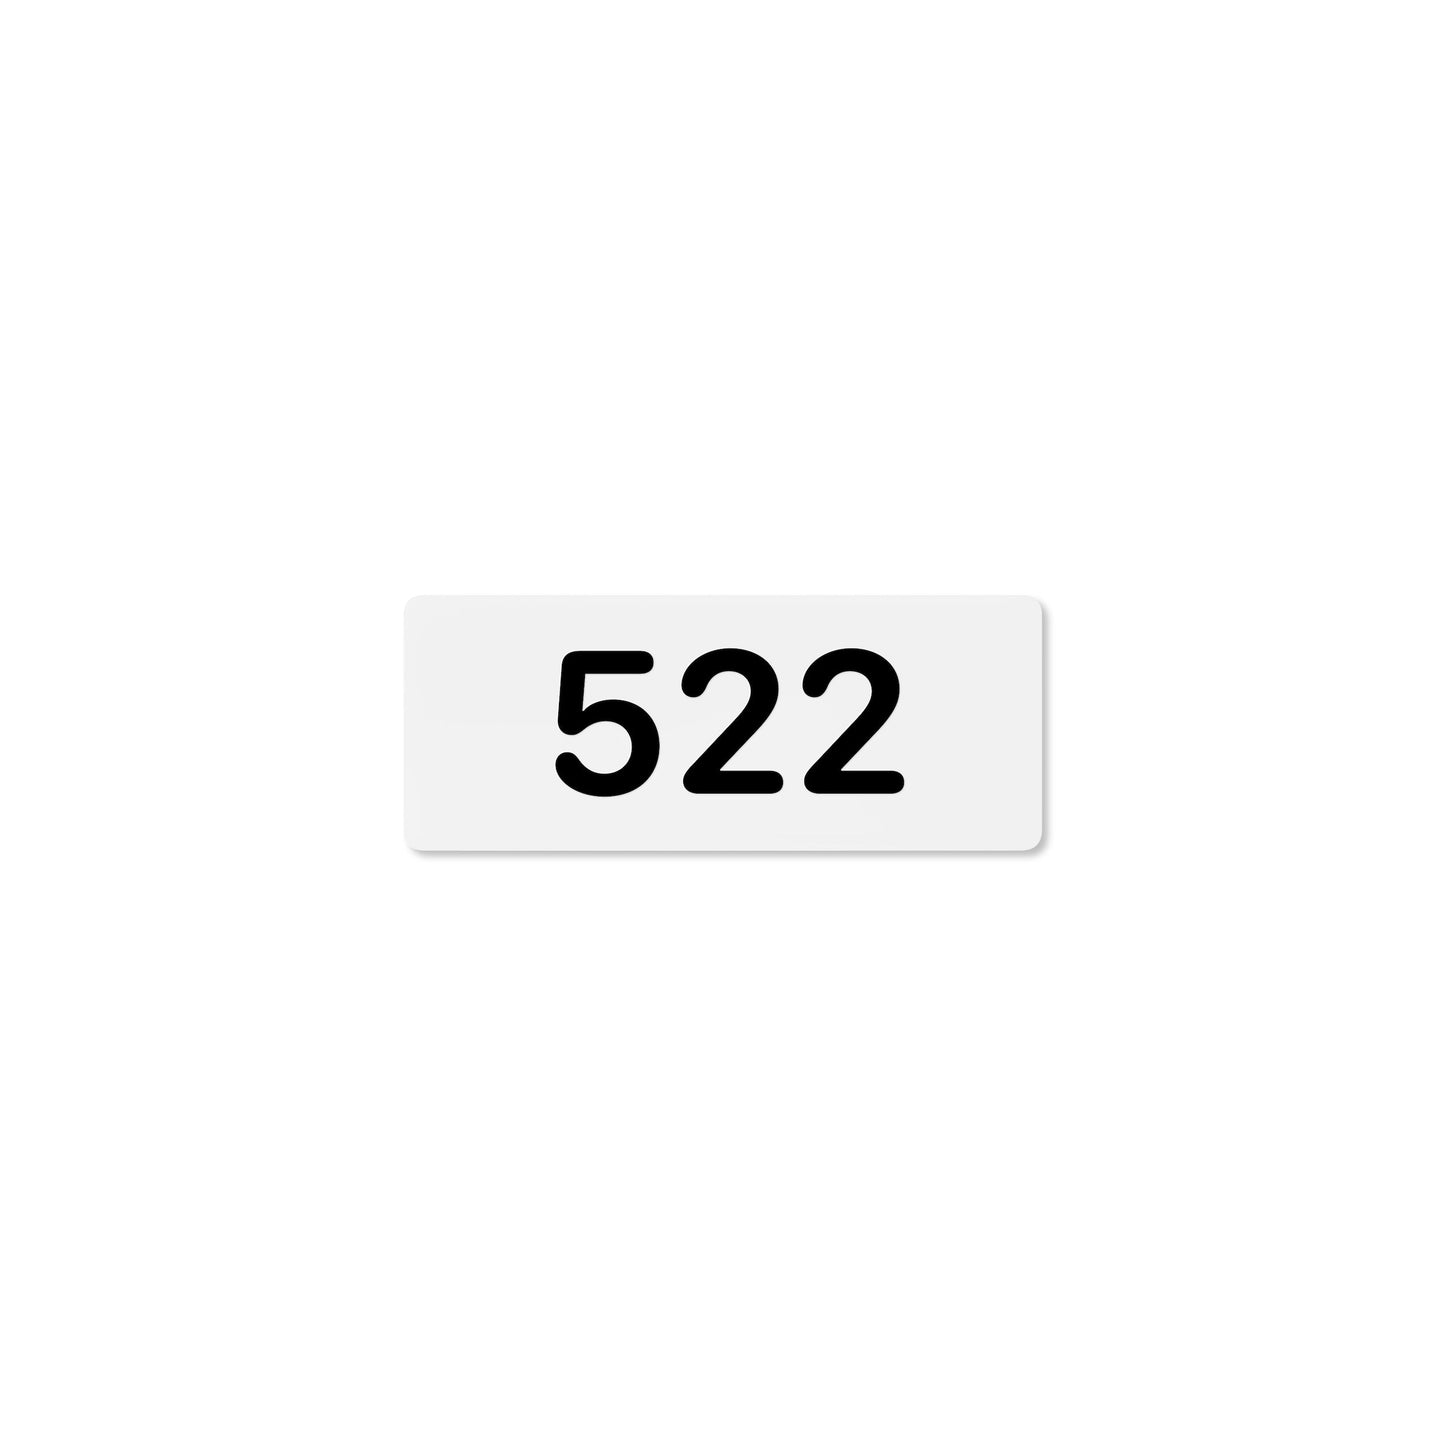 Numeral 522